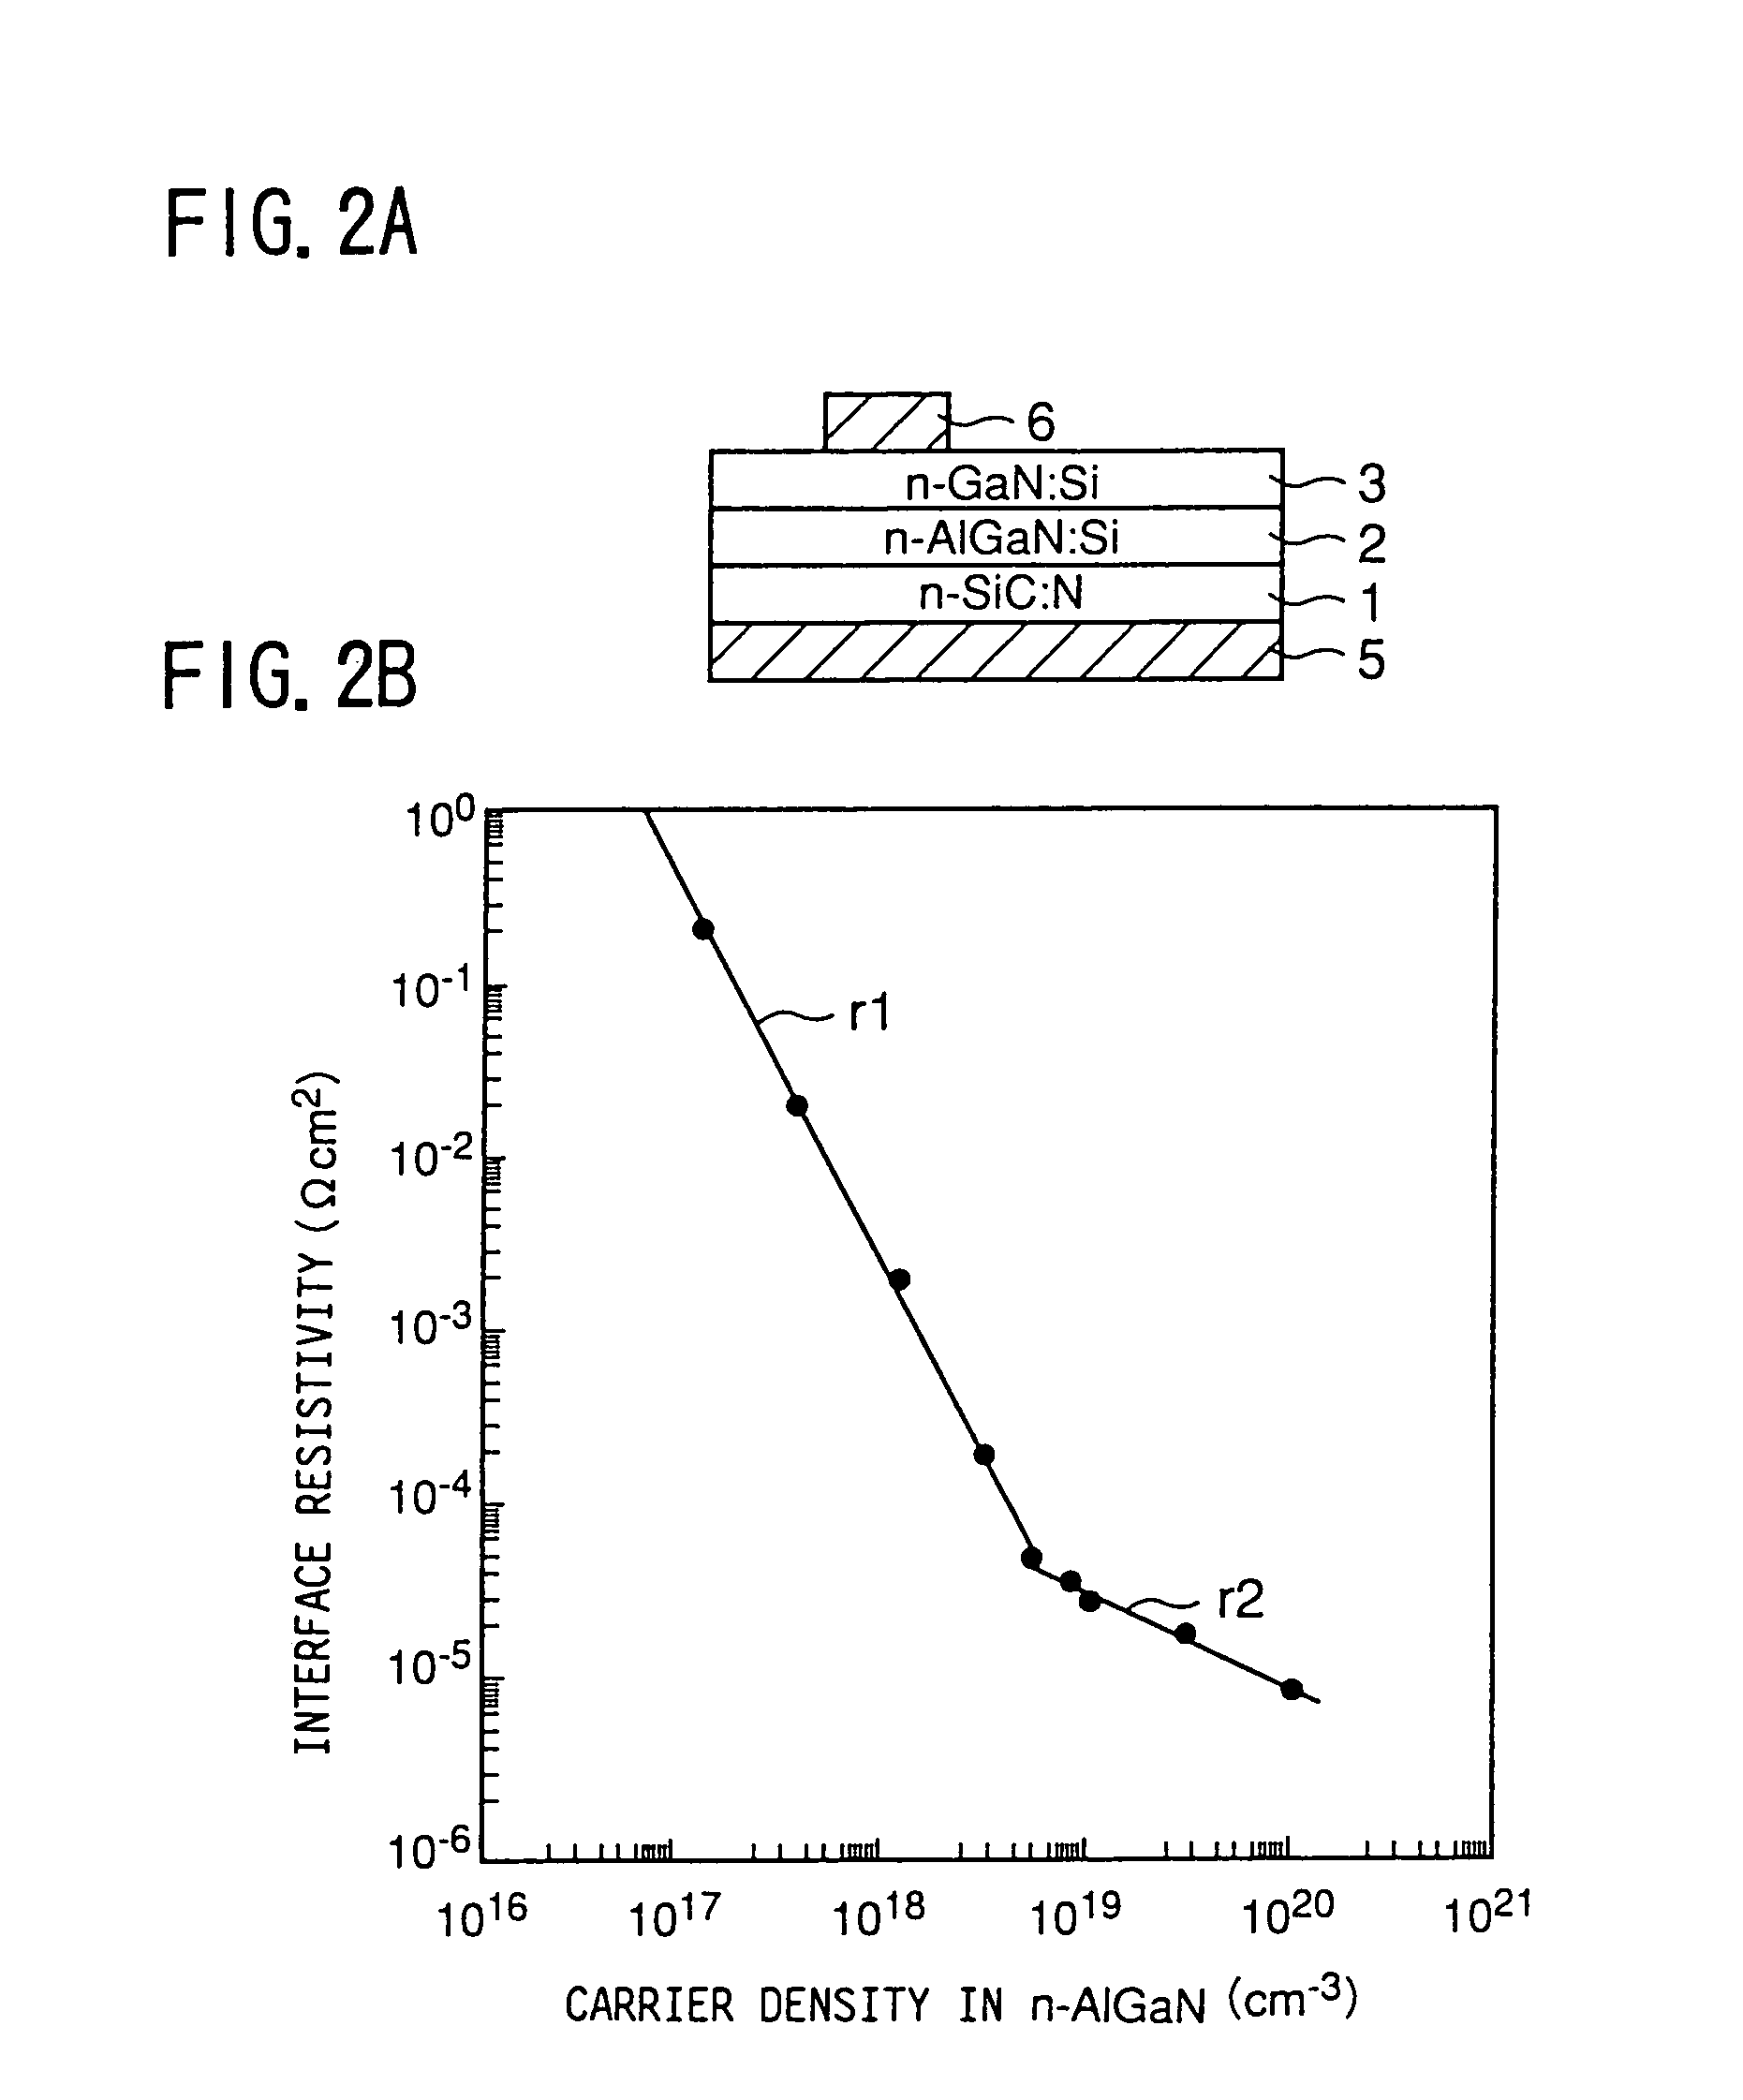 Optical semiconductor device having an epitaxial layer of III-V compound semiconductor material containing N as a group V element